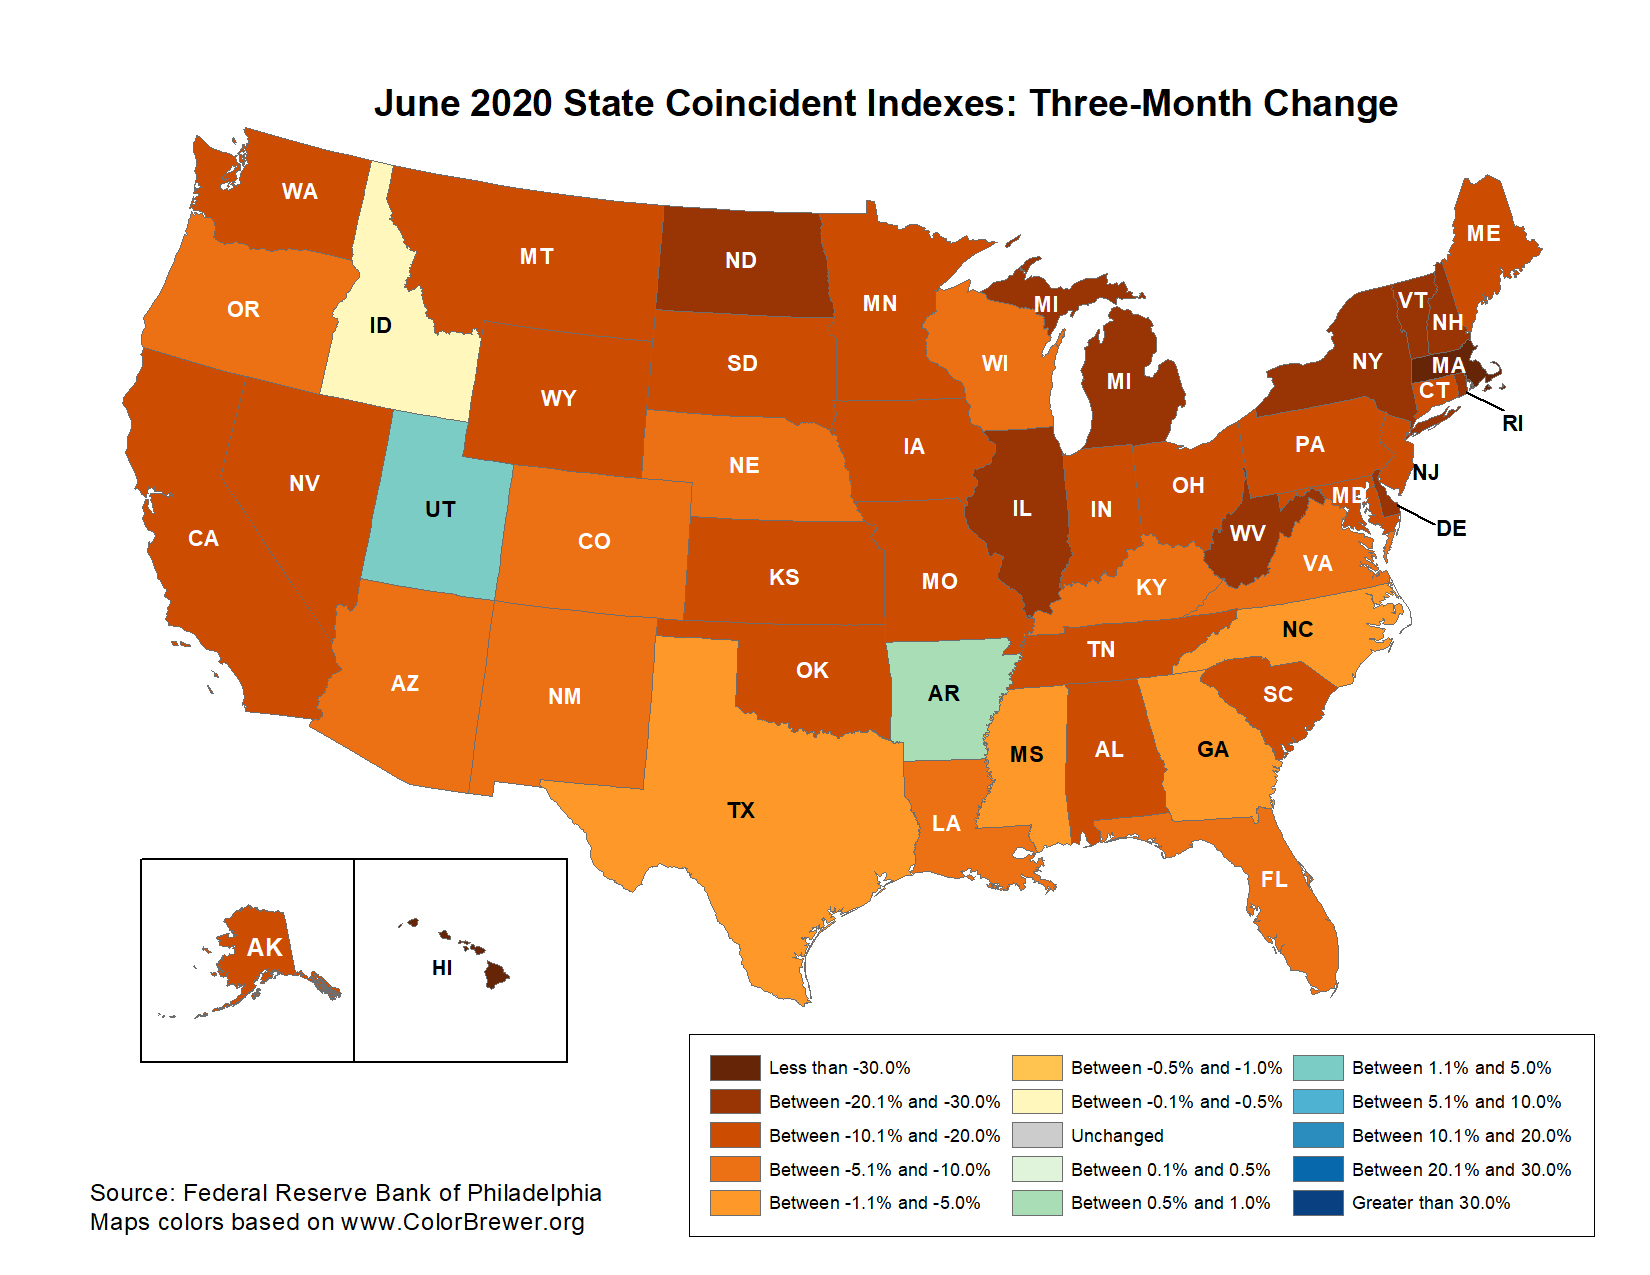 Map of the U.S. showing the State Coincident Indexes Three-Month Change in June 2020